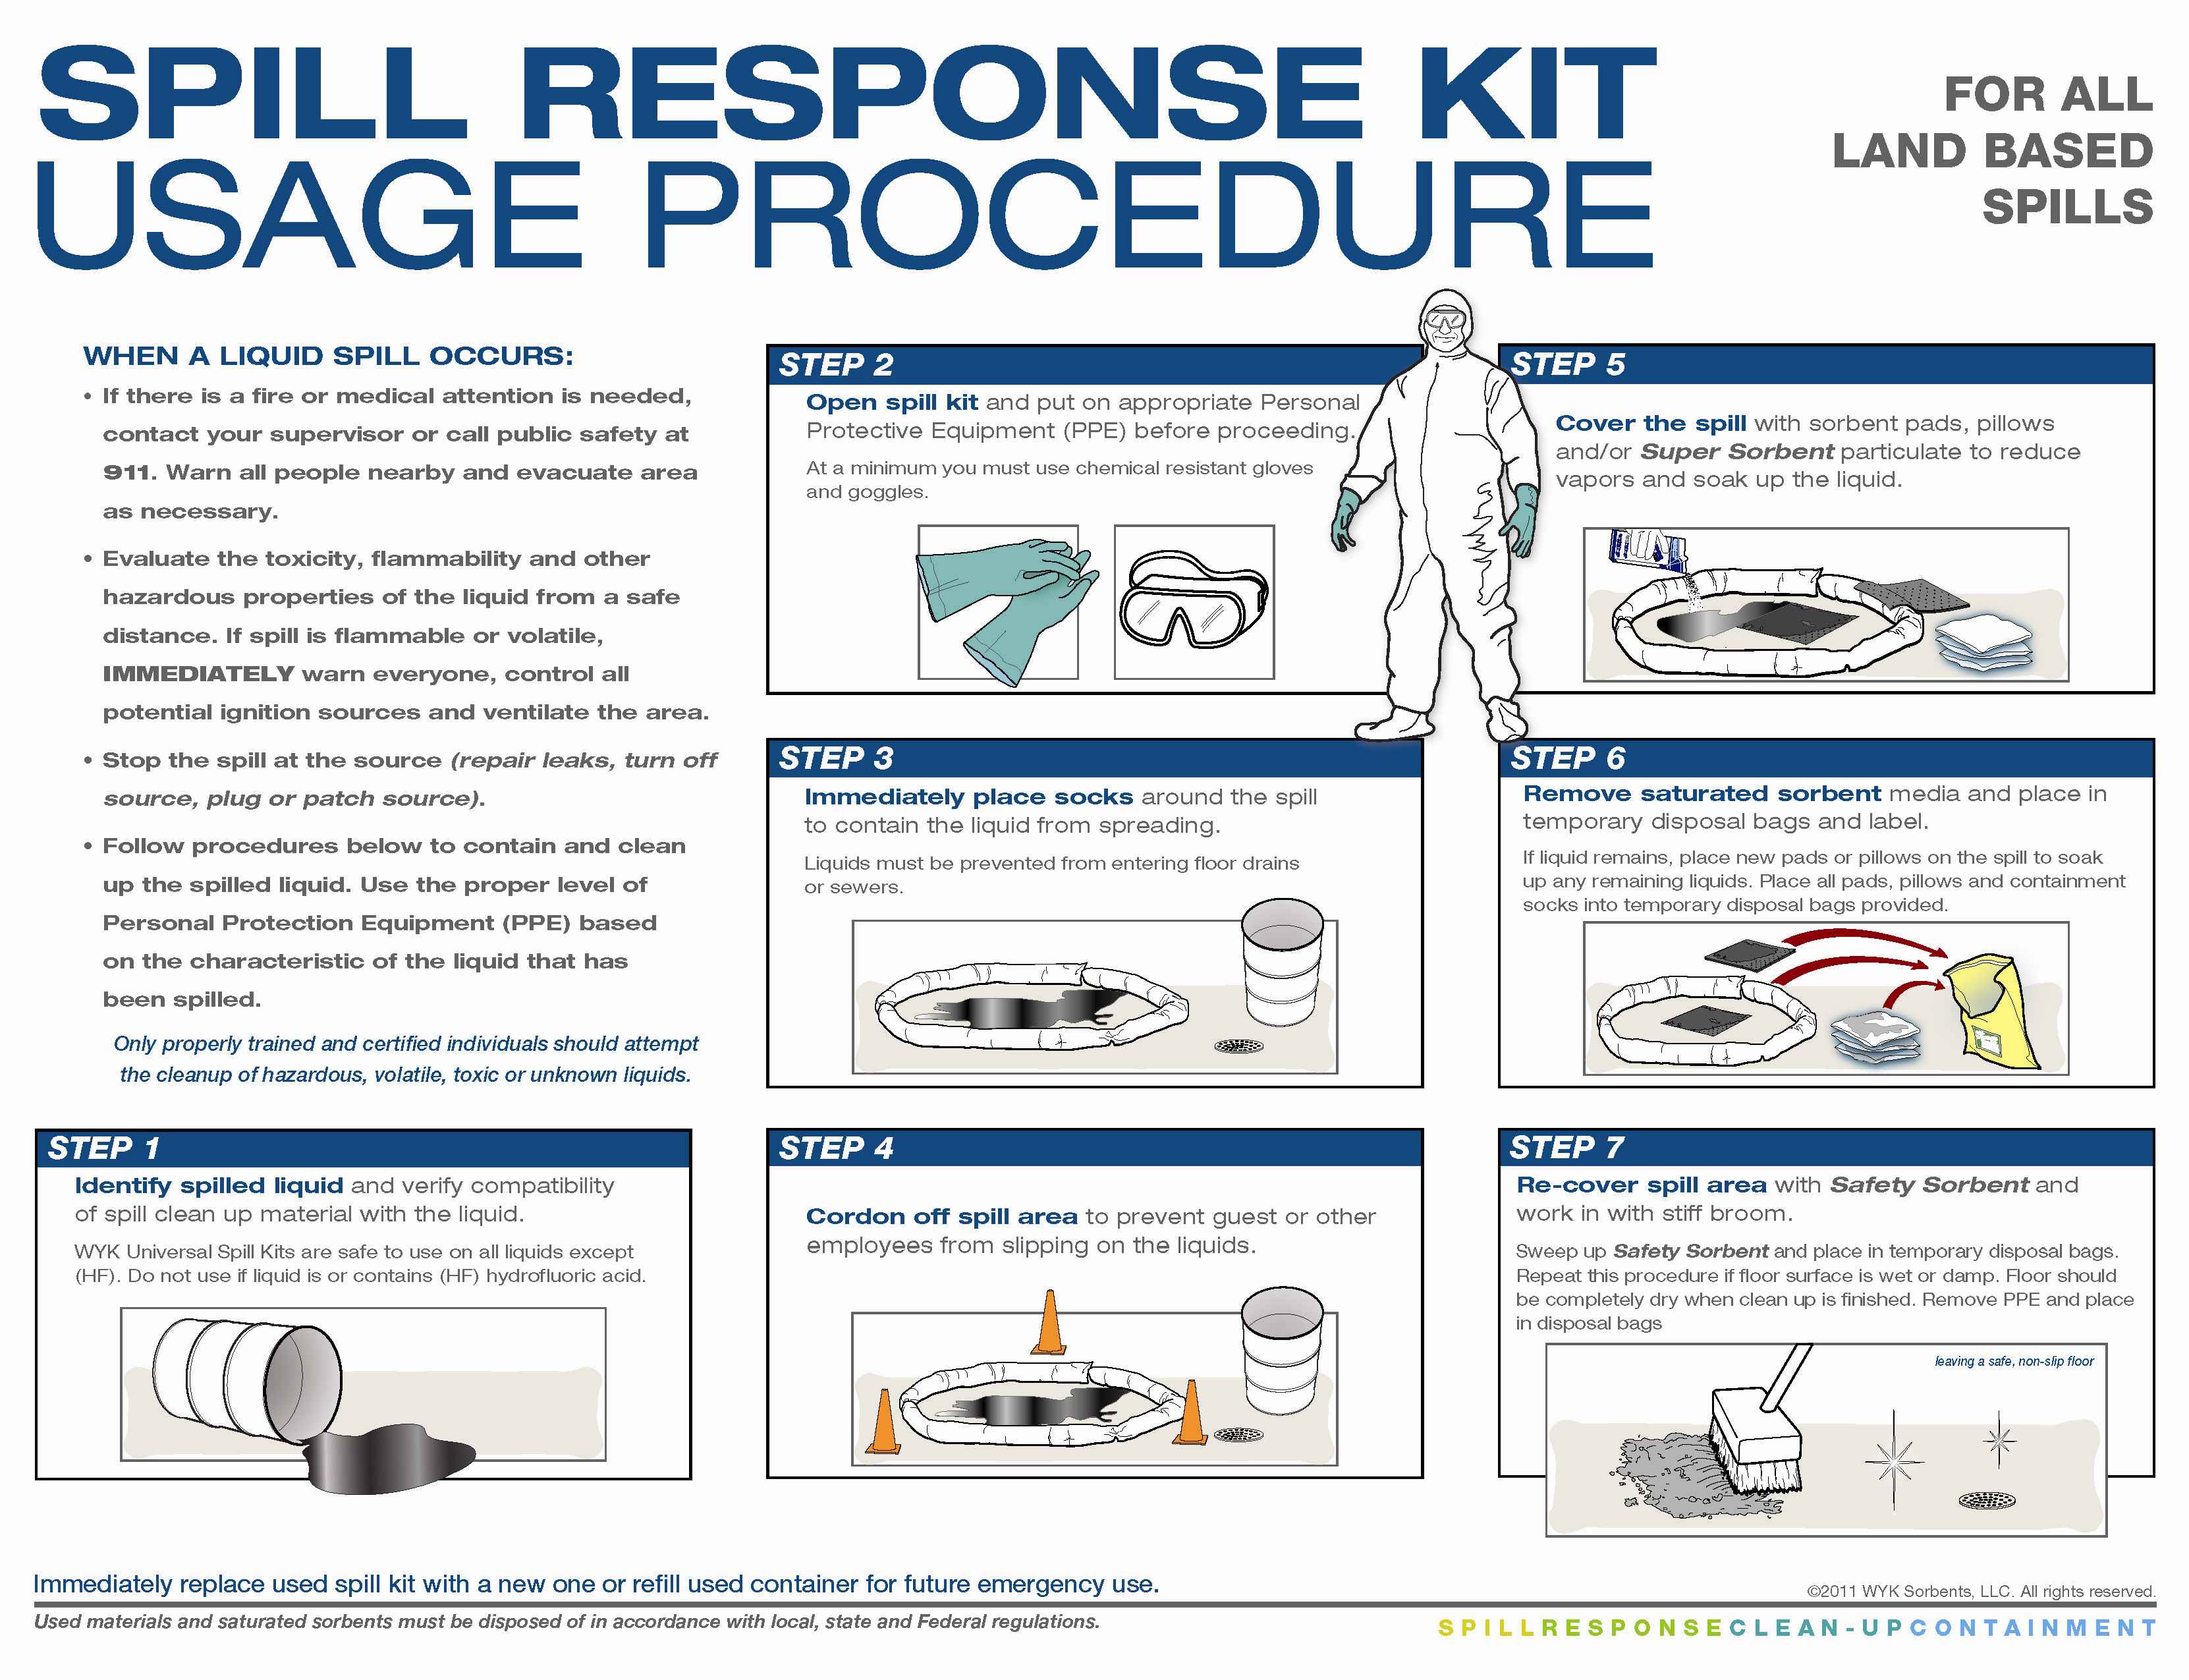 Do Your Employees Know How To Use A Spill Response Kit